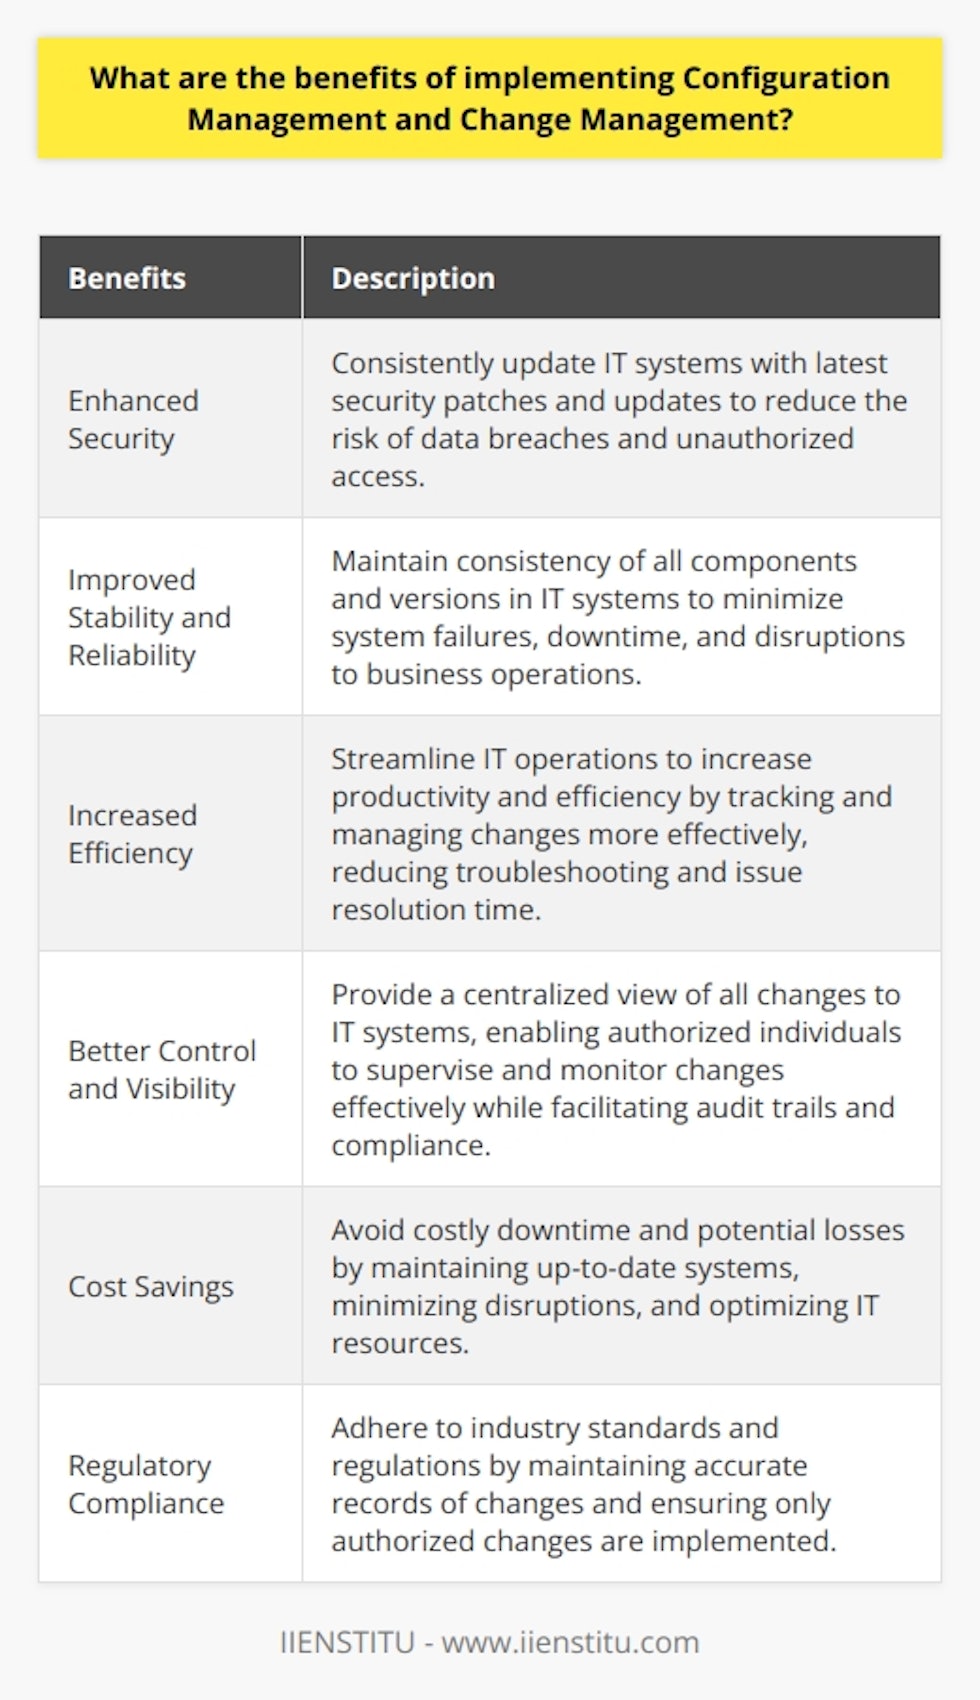 Some of the benefits of implementing Configuration Management and Change Management are as follows:1. Enhanced Security: By implementing configuration management and change management, organizations can ensure that their IT systems are consistently updated with the latest security patches and updates. This reduces the risk of data breaches and unauthorized access to sensitive information.2. Improved Stability and Reliability: Configuration management helps organizations maintain the stability and reliability of their IT systems by ensuring that all components and versions are consistent. This reduces the chances of system failures, downtime, and disruptions to business operations.3. Increased Efficiency: Effective configuration and change management processes streamline IT operations, resulting in increased productivity and efficiency. Organizations can track and manage changes more effectively, reducing the time and effort required for troubleshooting and resolving issues.4. Better Control and Visibility: Configuration and change management provide organizations with a centralized view of all changes made to their IT systems. This allows for better control, as authorized individuals can supervise and monitor changes effectively. Additionally, organizations can track and document all changes, facilitating audit trails and compliance with regulatory requirements.5. Cost Savings: Implementing configuration and change management can lead to cost savings in the long run. By maintaining up-to-date systems and minimizing disruptions, organizations avoid costly downtime and potential losses due to security breaches or system failures. Proper configuration management also helps in optimizing IT resources, reducing unnecessary expenses.6. Regulatory Compliance: Configuration management and change management contribute to meeting regulatory compliance requirements. By maintaining accurate records of changes made to IT systems and ensuring that only authorized changes are implemented, organizations can demonstrate their adherence to industry standards and regulations.It is important to note that the specific benefits and implementation strategies for configuration management and change management may vary depending on the organization's unique IT environment and requirements. Therefore, it is crucial for organizations to assess their needs and tailor these processes accordingly to maximize the benefits of their implementation.